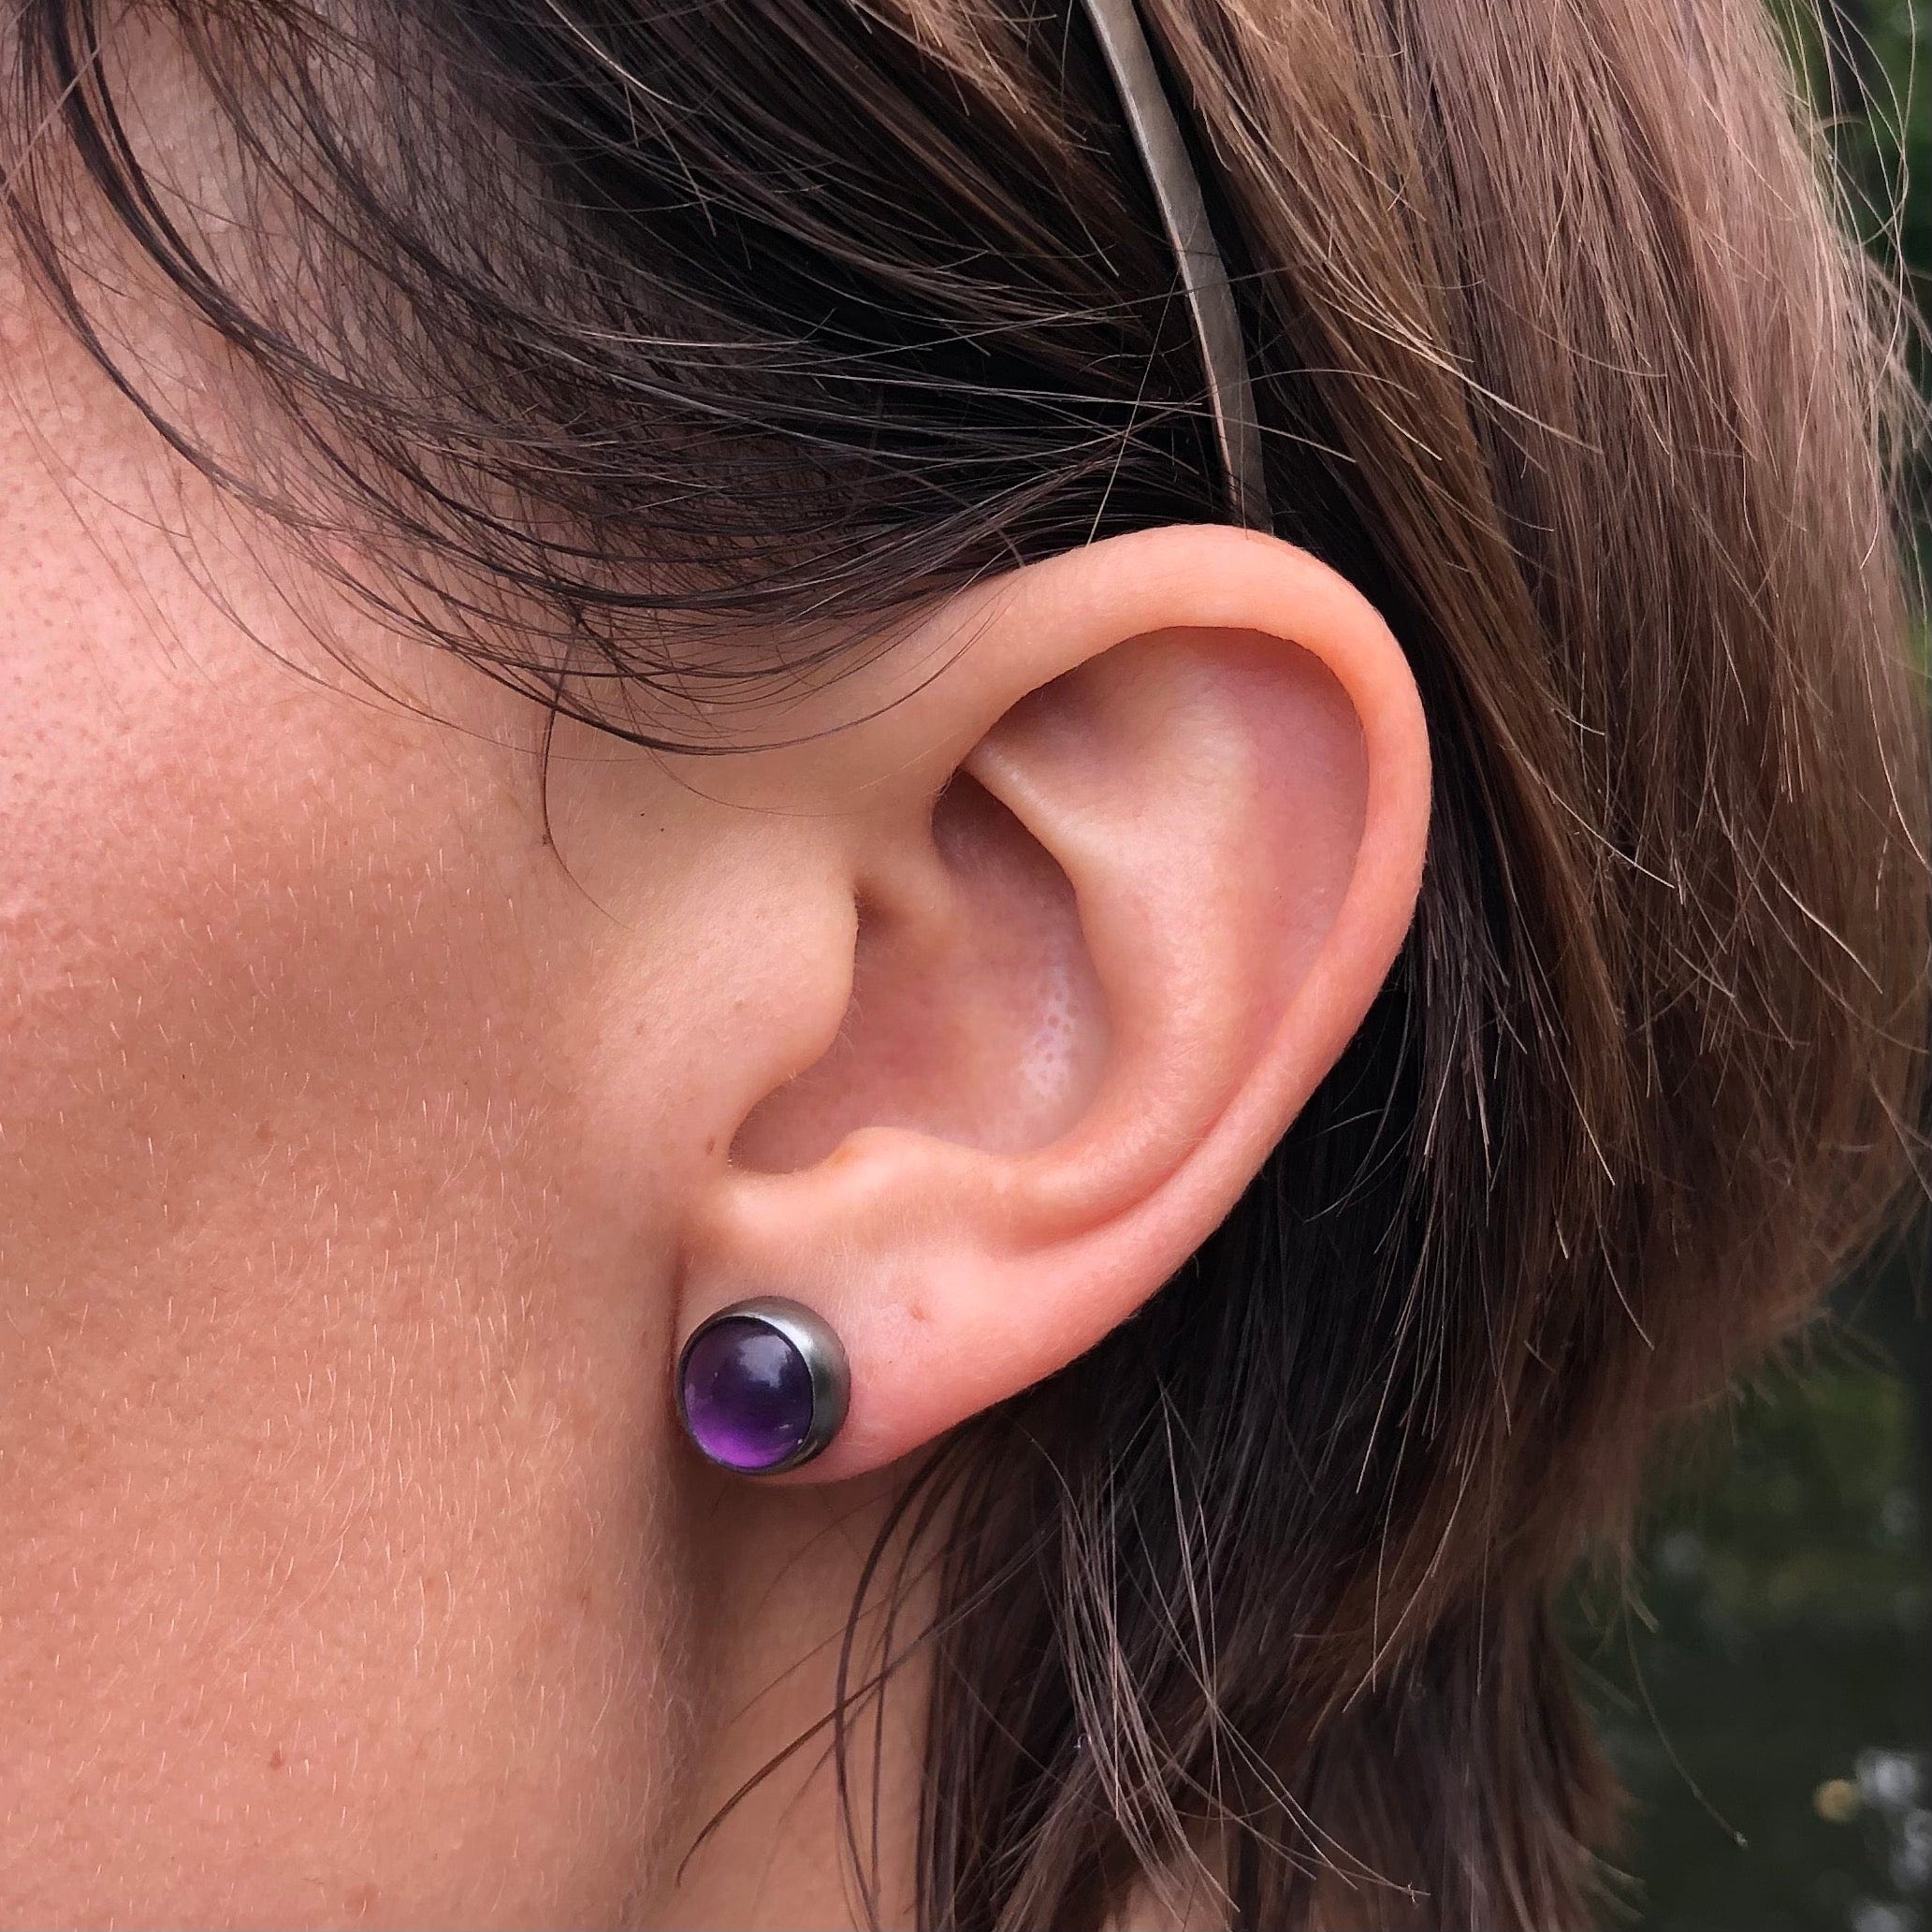 Amethyst Amulet Post earrings worn with sterling silver headband.  Part of the Season of the Witch collection by Alex Lozier Jewelry.